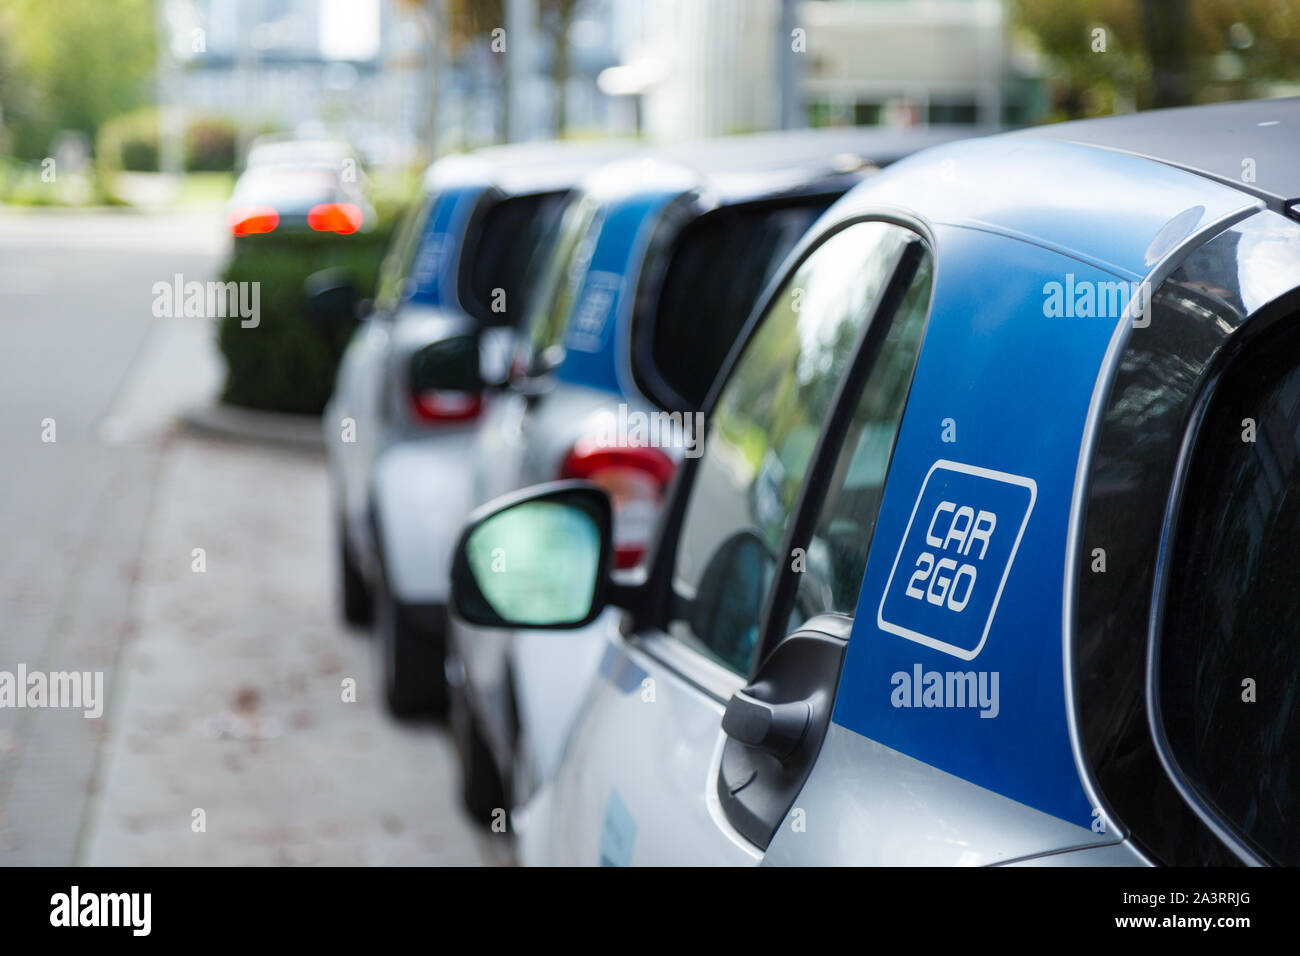 VANCOUVER, BC, CANADA - SEPT 21, 2019: A row of Car2Go SmartCars in Vancouver's Olympic Village which make up part of Vancouver's ridesharing car Stock Photo